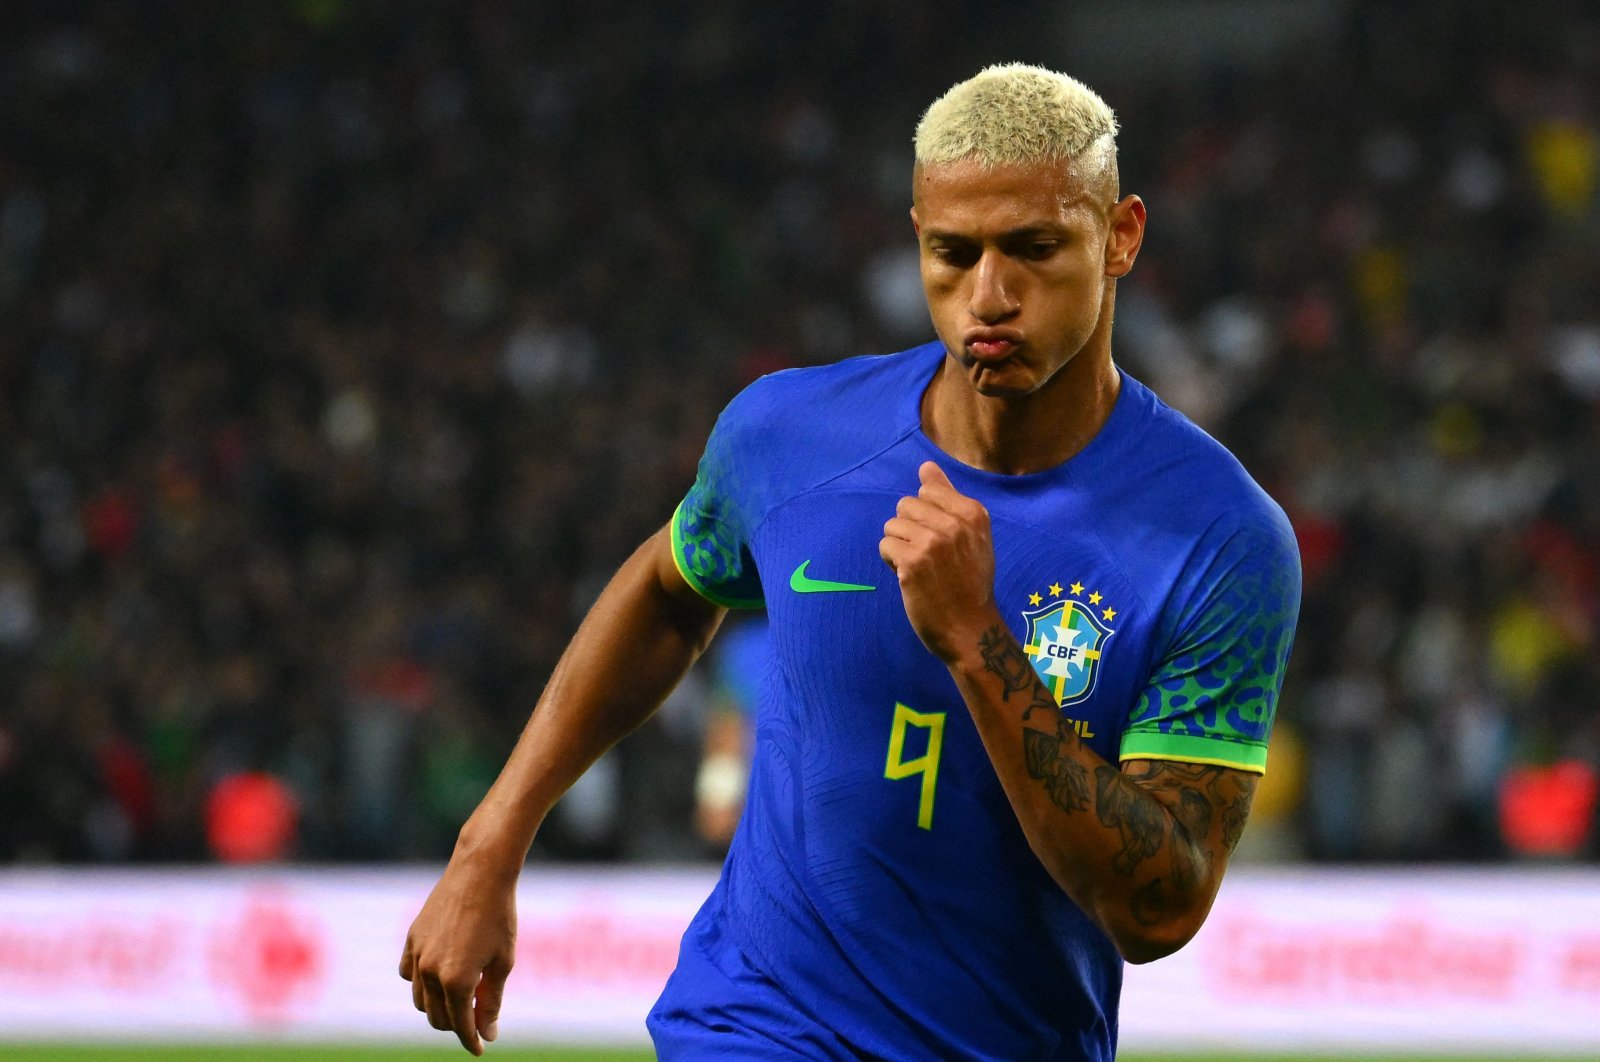 Brazil&#039;s forward Richarlison celebrates after scoring his team&#039;s second goal during the friendly football match between Brazil and Tunisia at the Parc des Princes. Paris, Sept. 27, 2022. (AFP Photo)